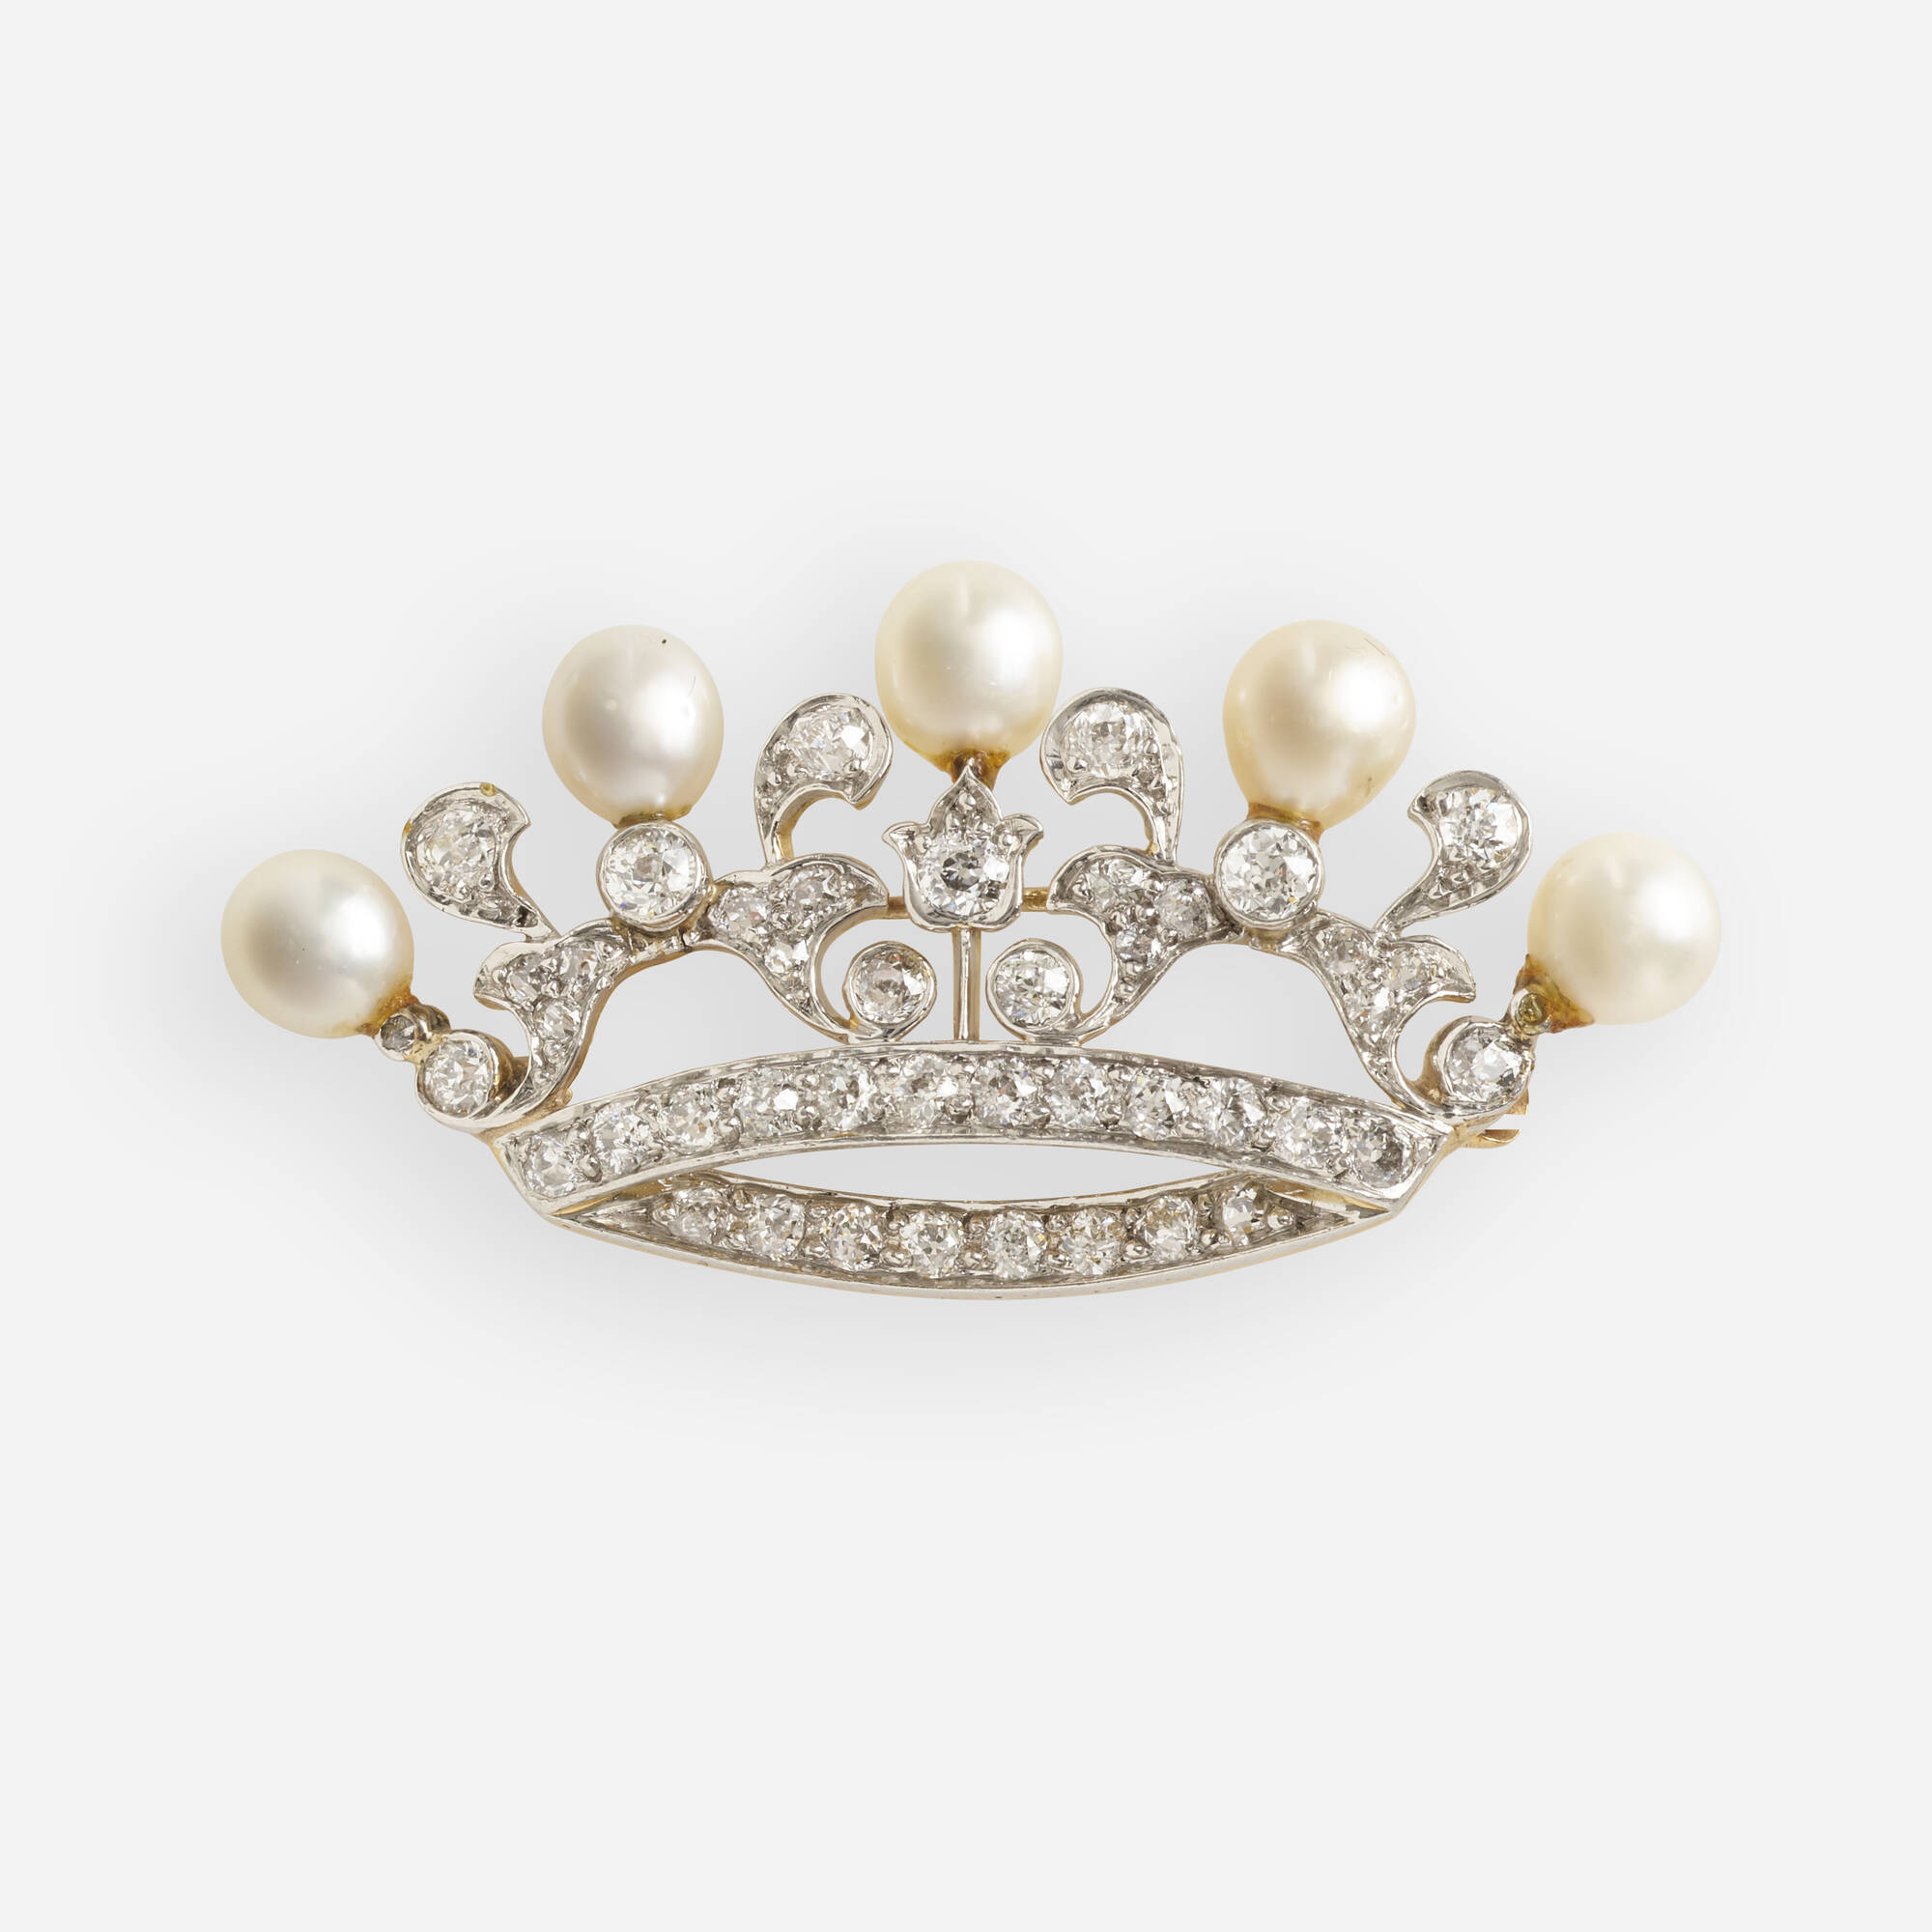 116: Antique diamond and cultured pearl crown brooch